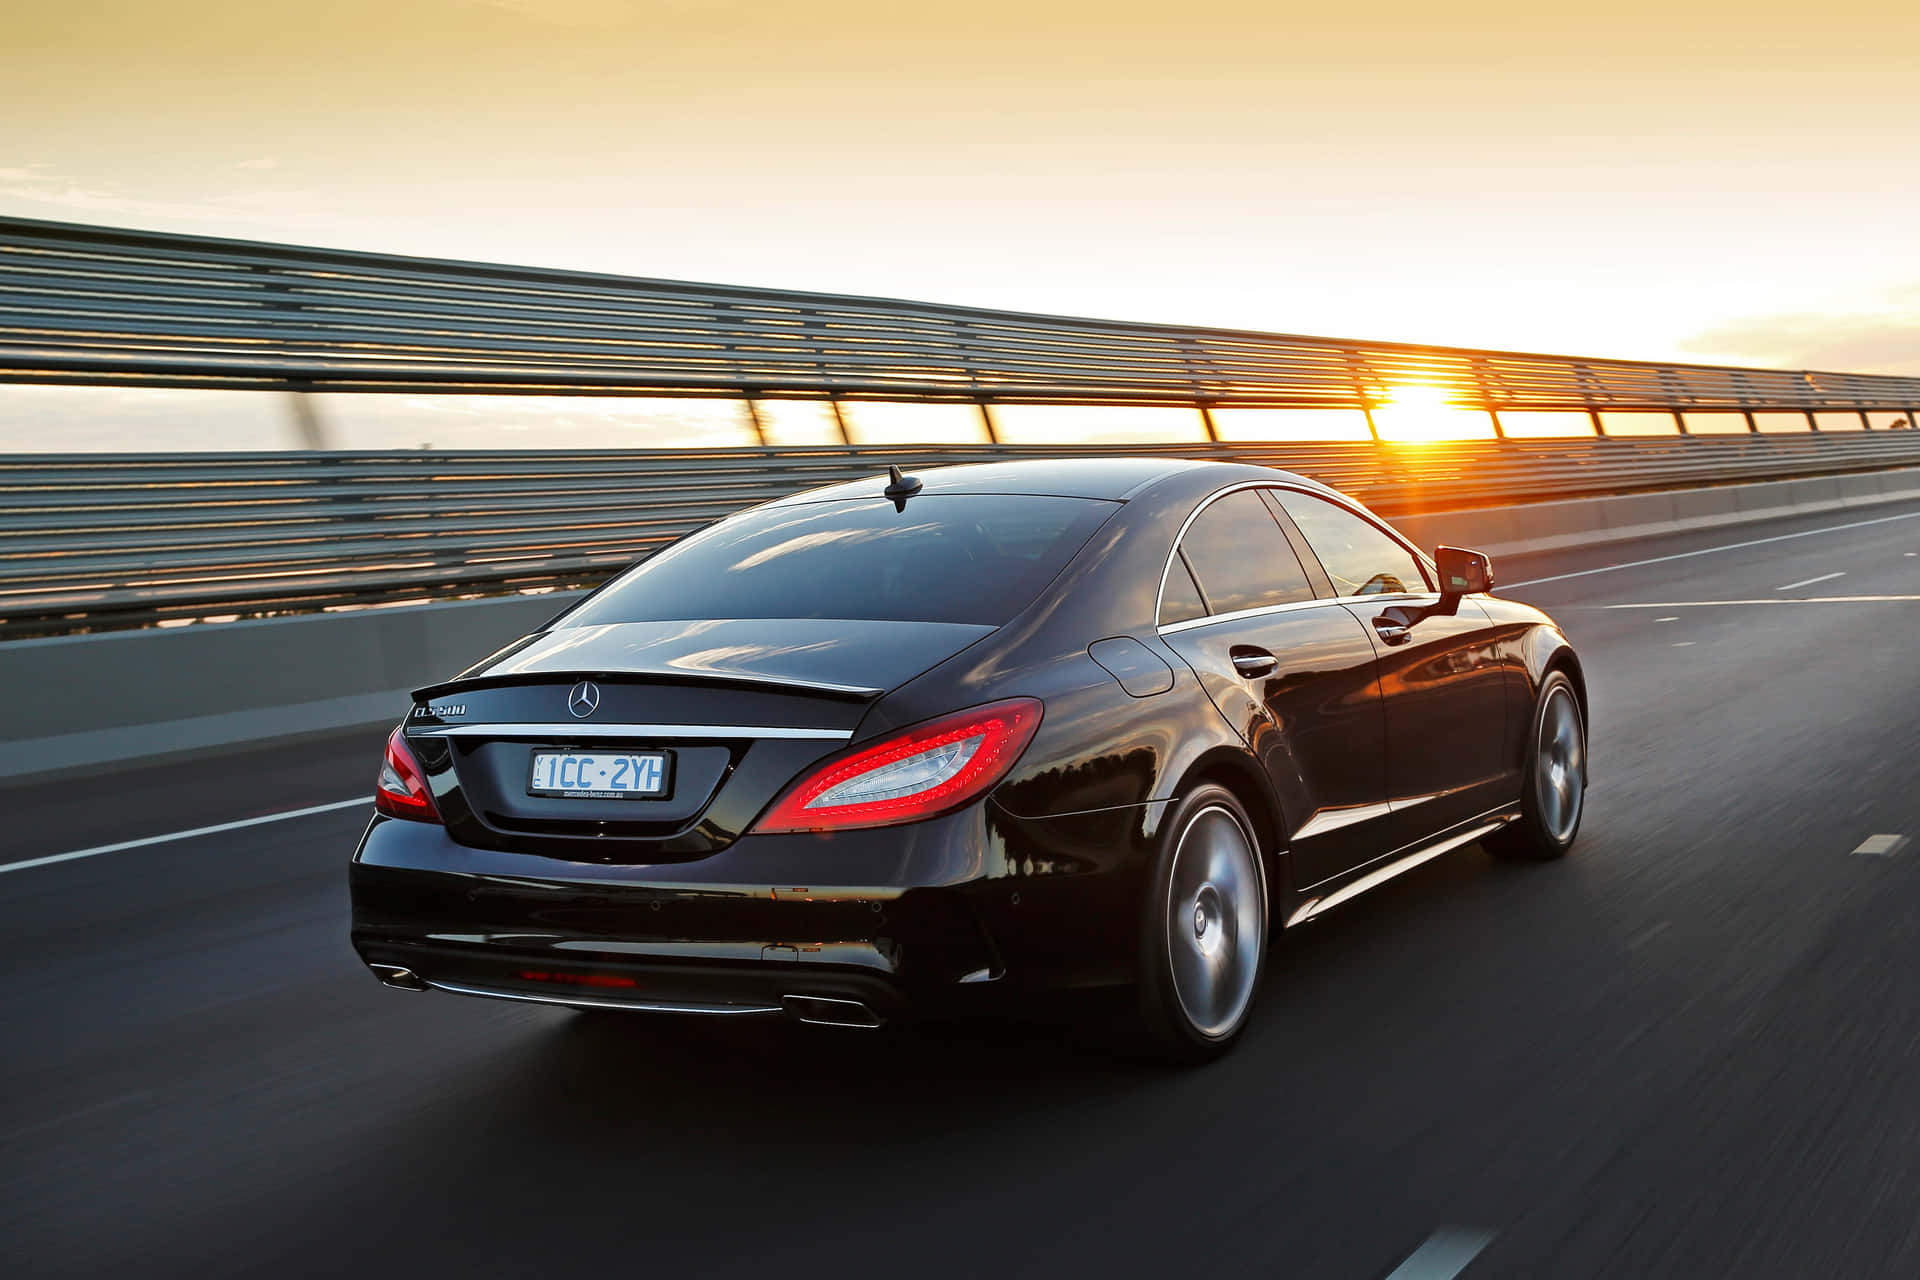 Stunning Mercedes Benz CLS-Class in motion on a scenic road Wallpaper